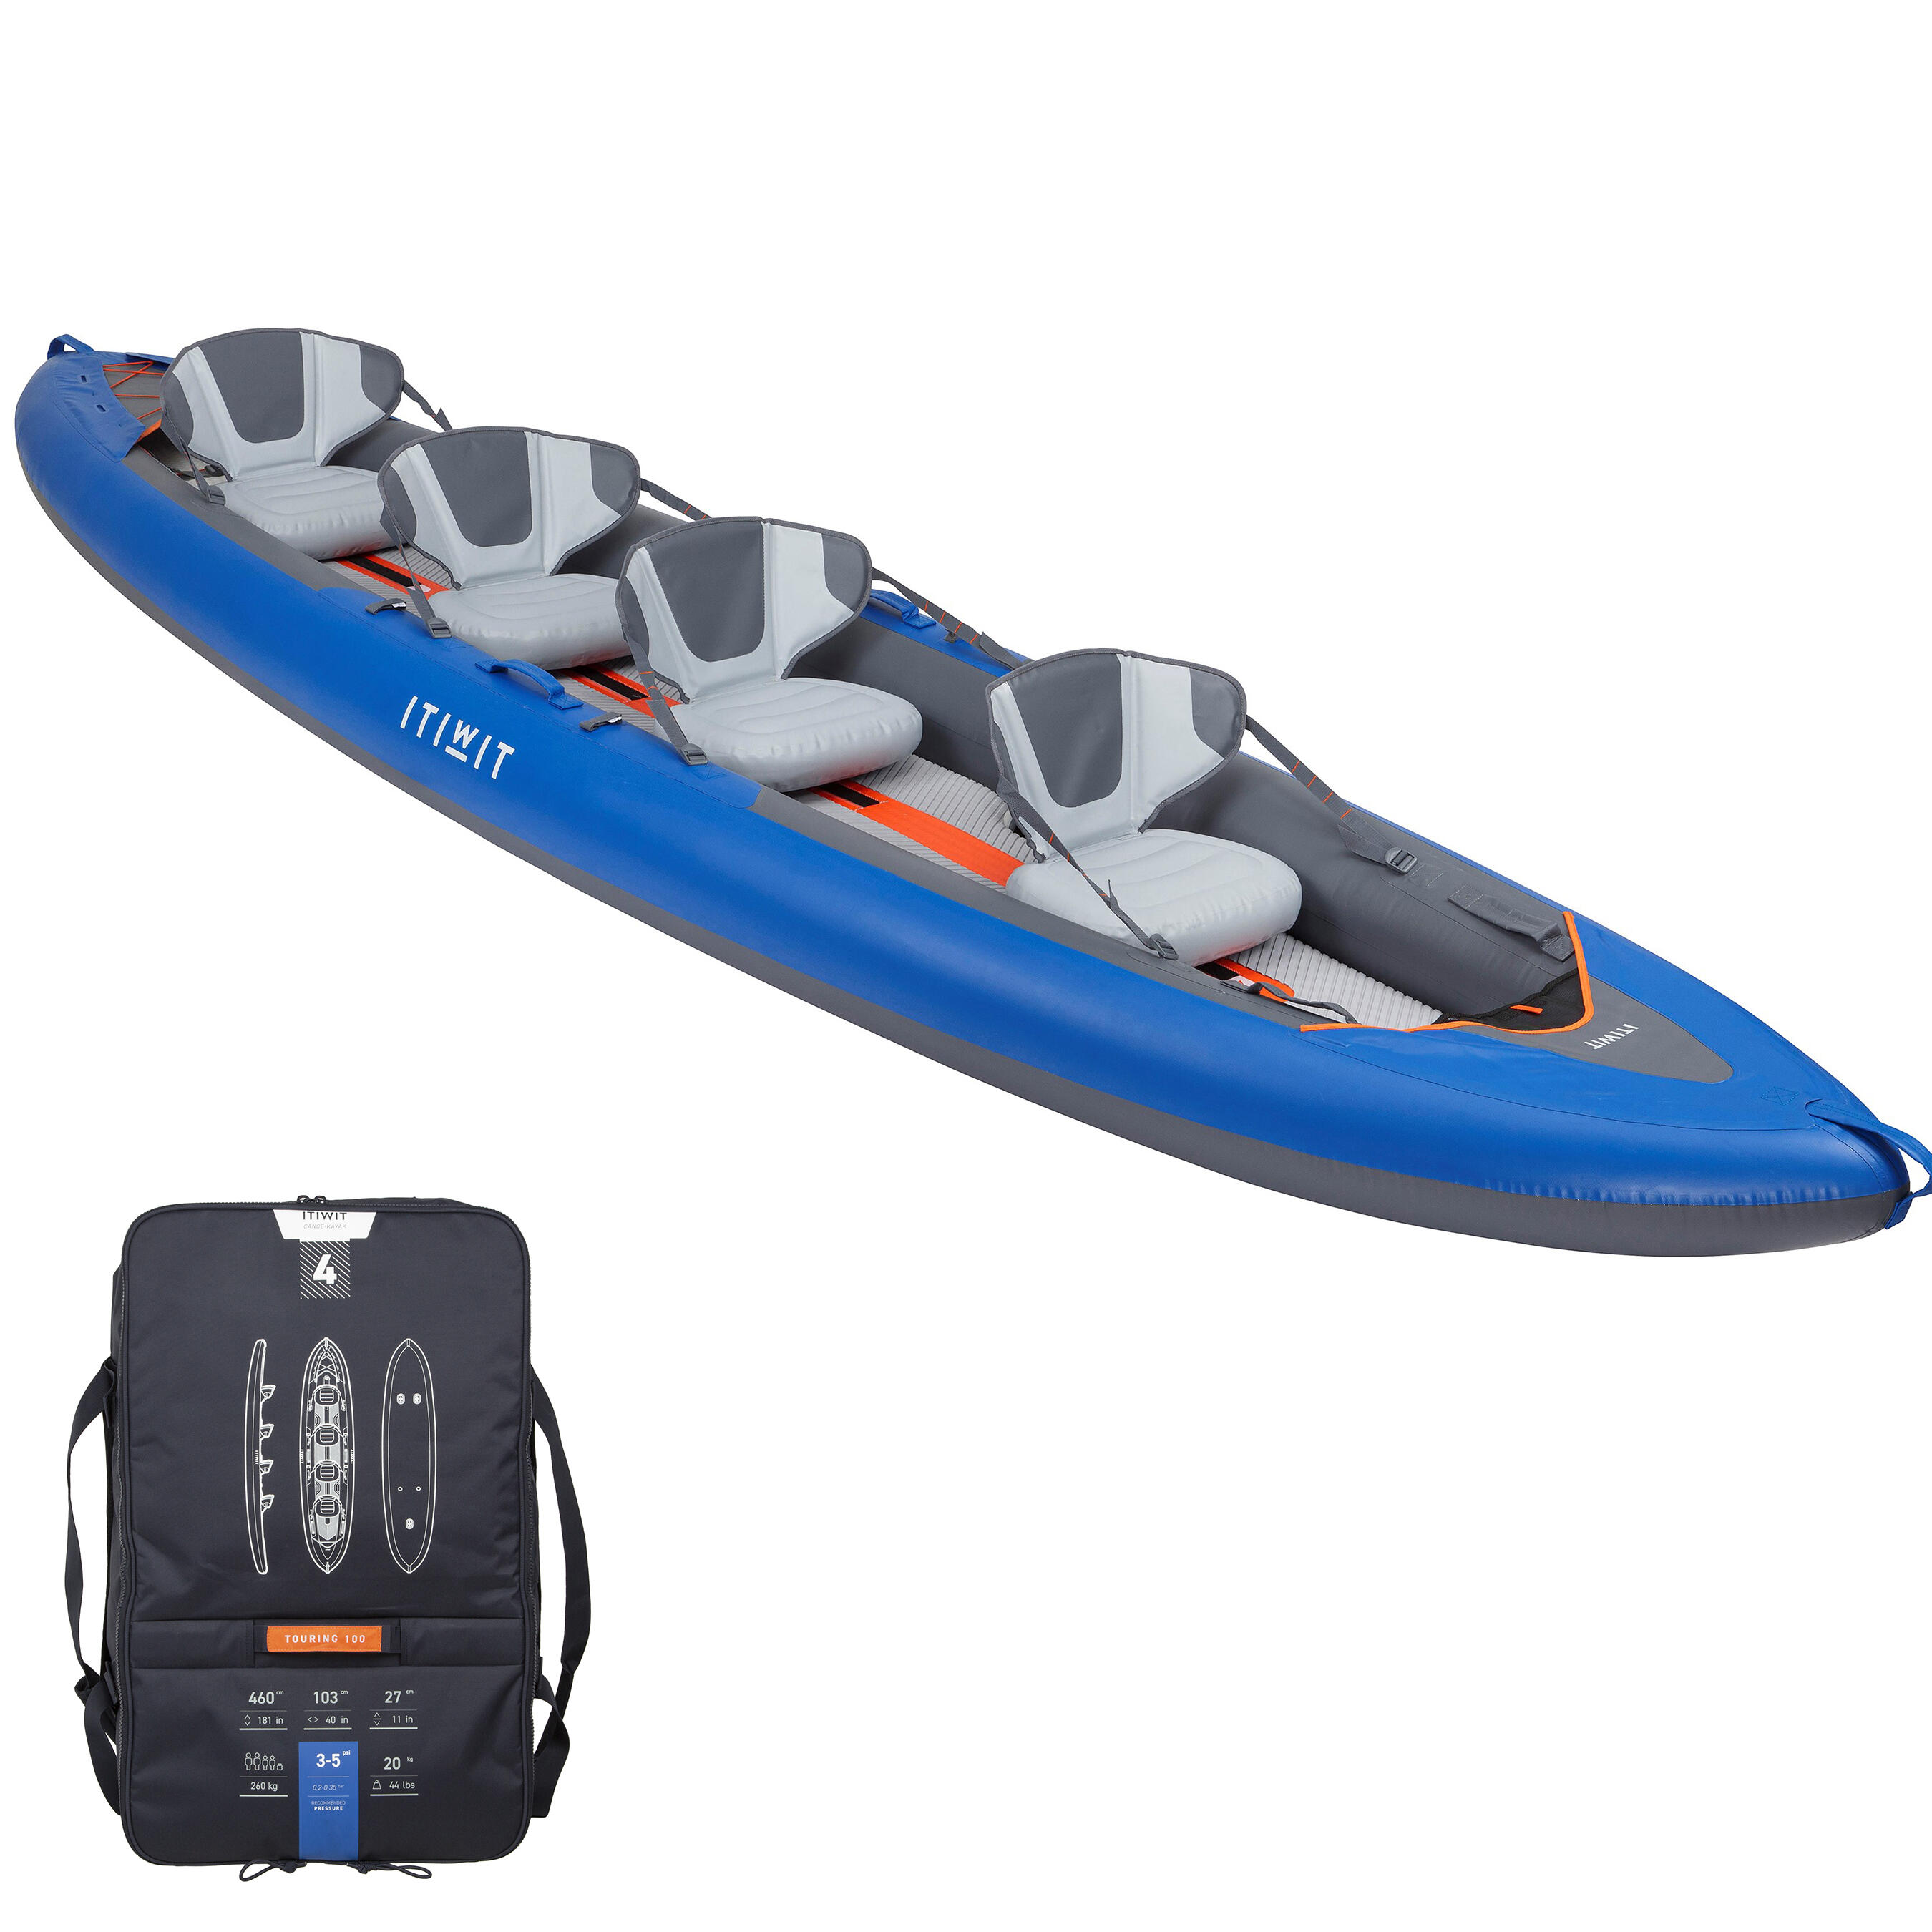 L'uomo 2 persona gonfiabile CANOA GOMMONE KAYAK GOMMONE GOMMONE Set con pagaie 